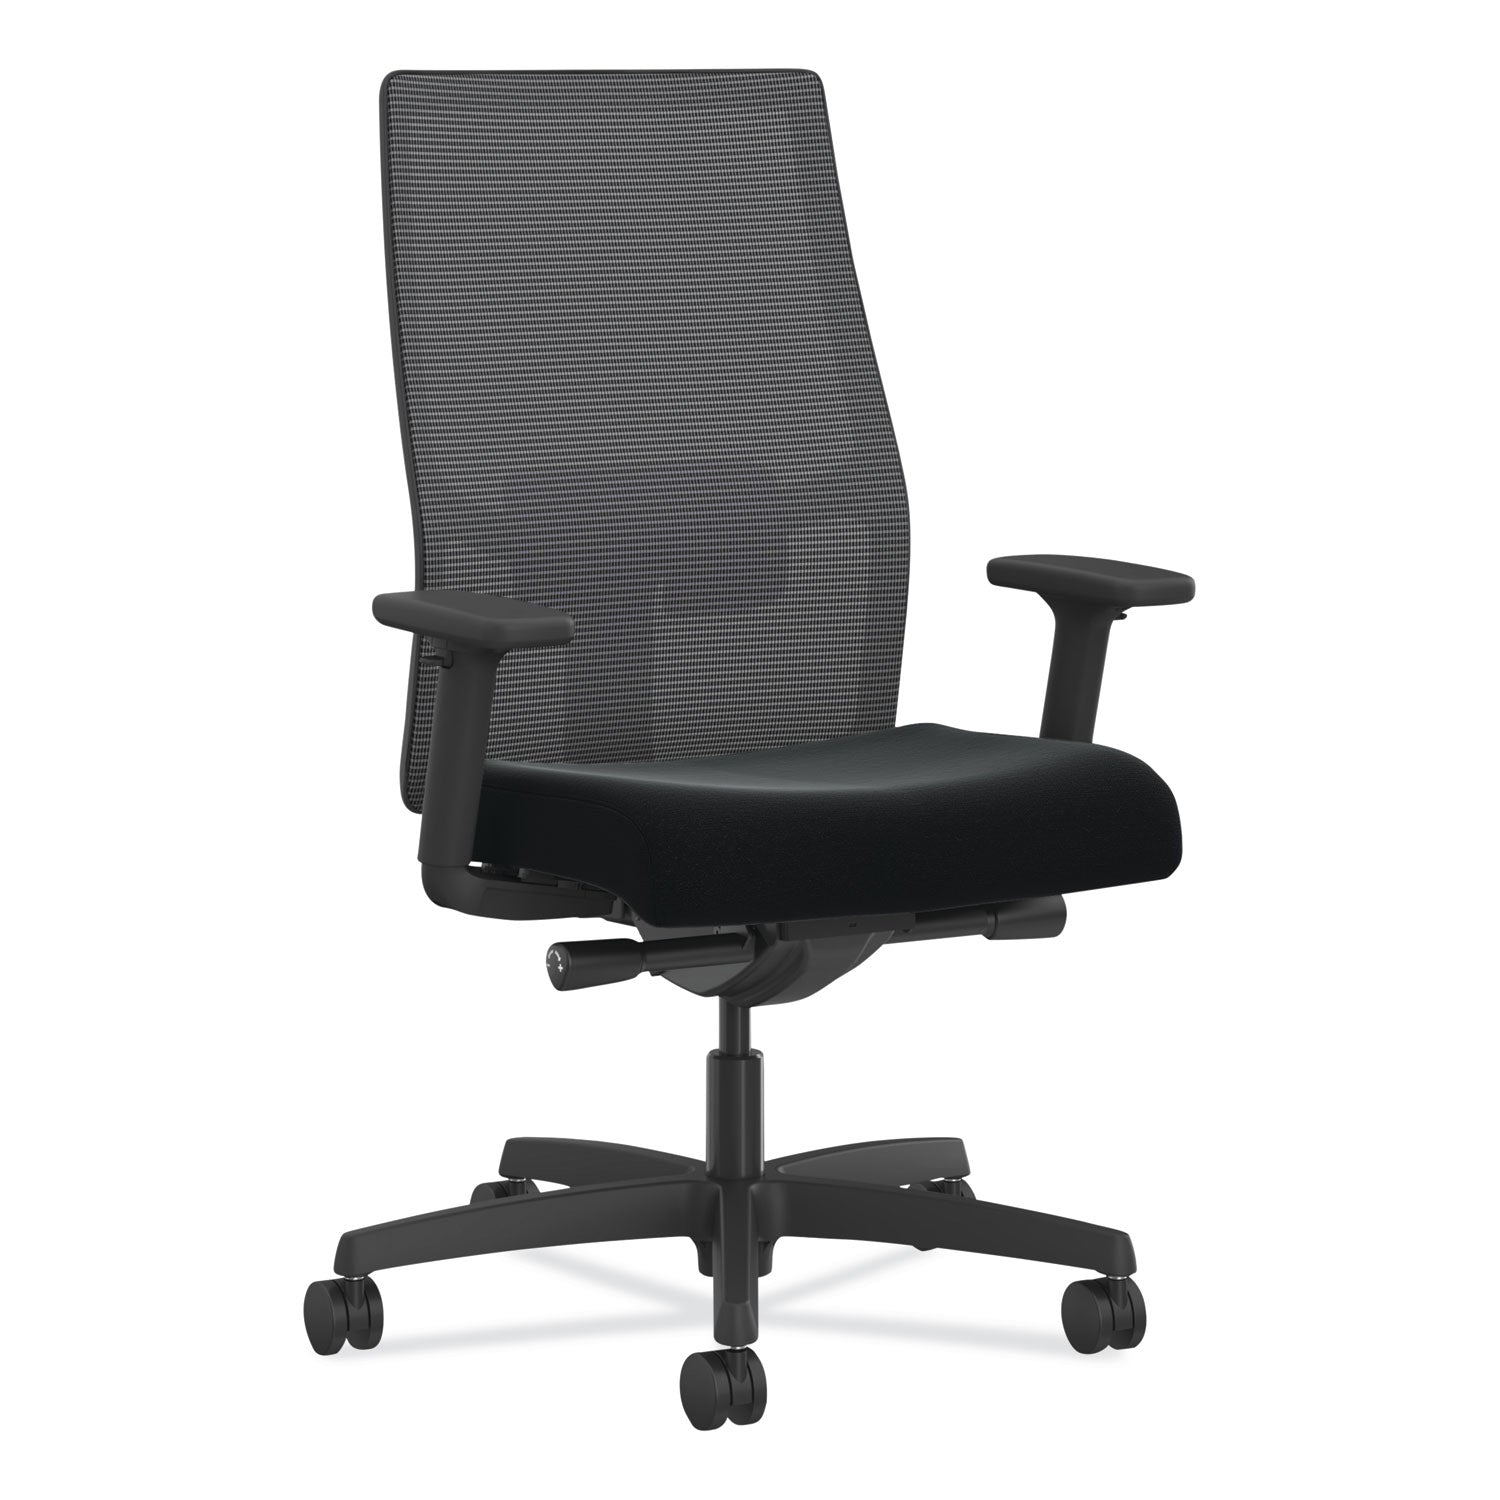 ignition-20-4-way-stretch-mid-back-mesh-task-chair-supports-300-lb-17-to-21-seat-height-black-ships-in-7-10-bus-days_honi2m2amc10irt - 1